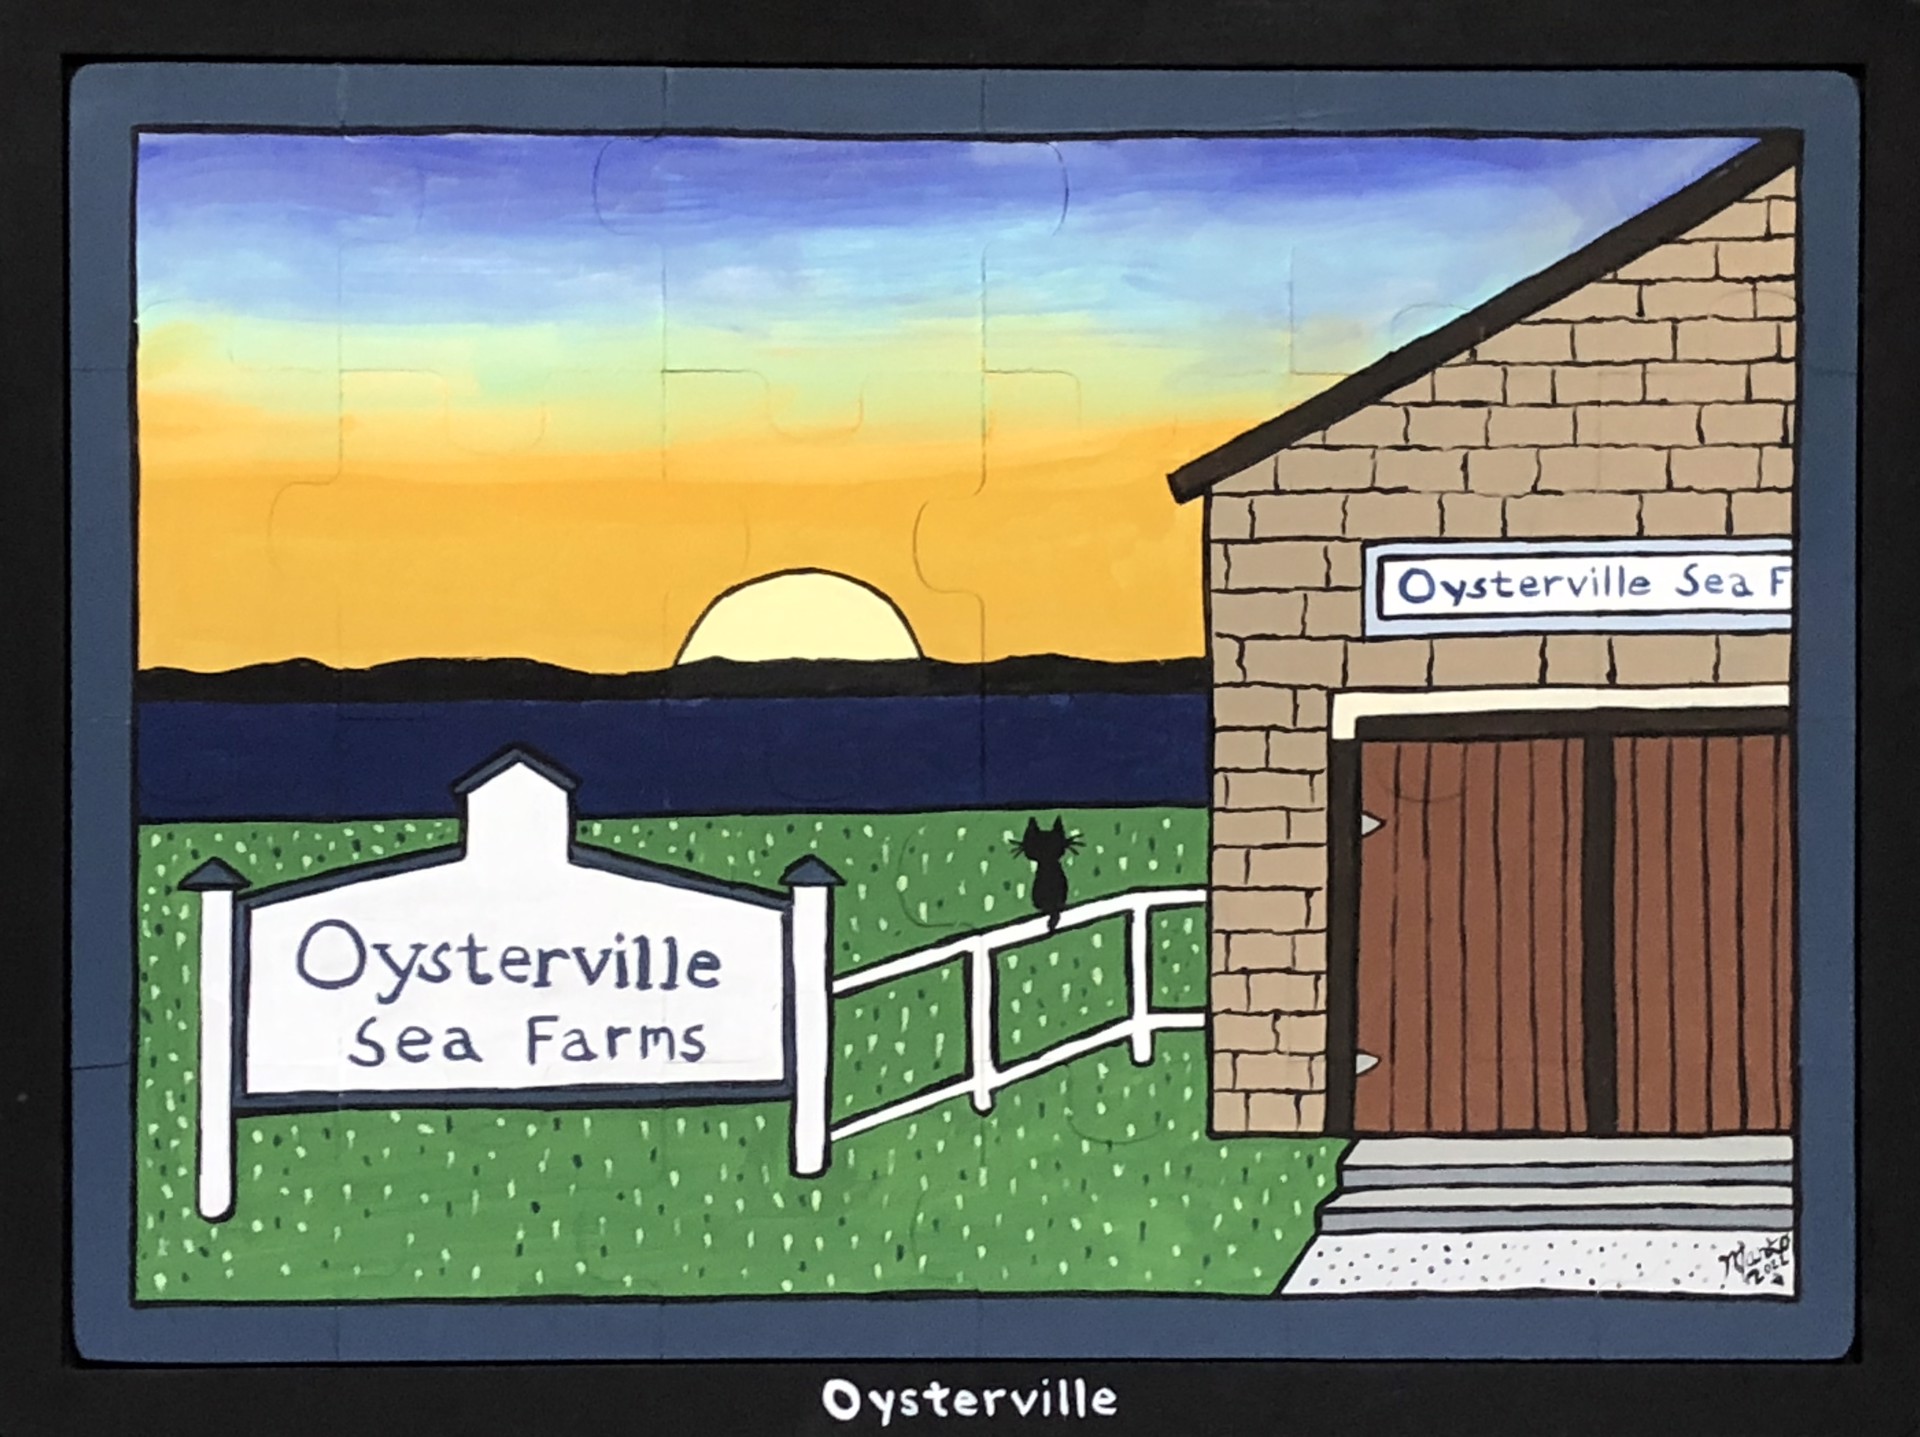 Oysterville Sea Farms by Mark O'Malley